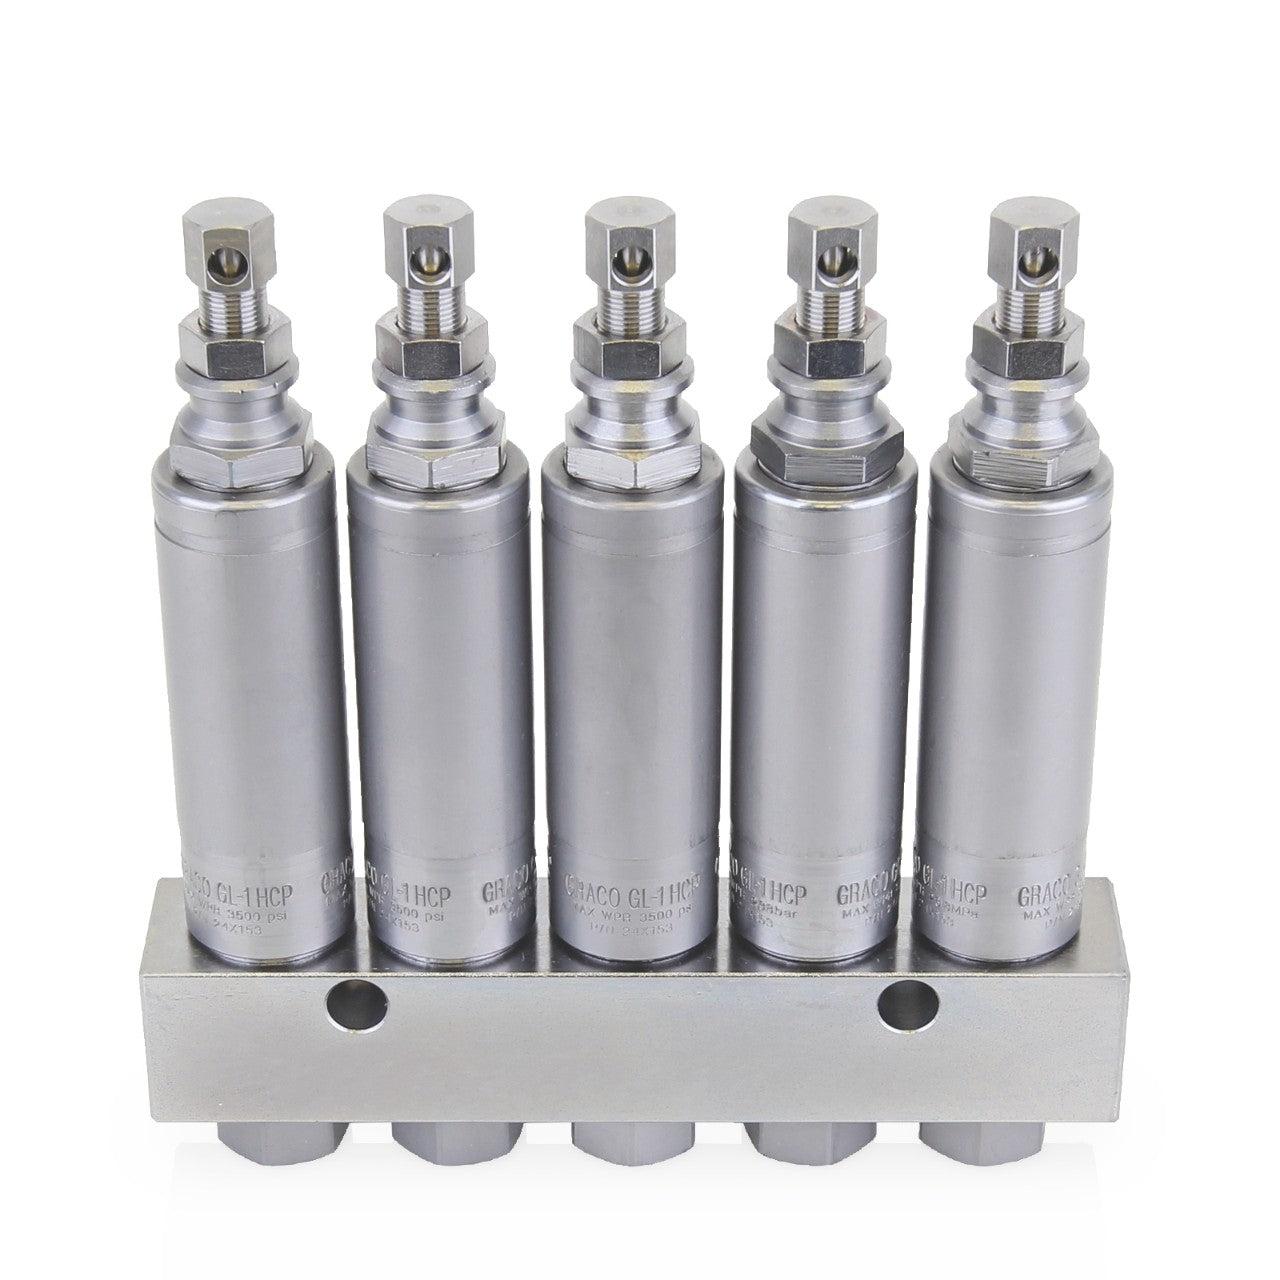 GL-1™ HCP (High Corrosion Protection) Grease Injector, Four Point